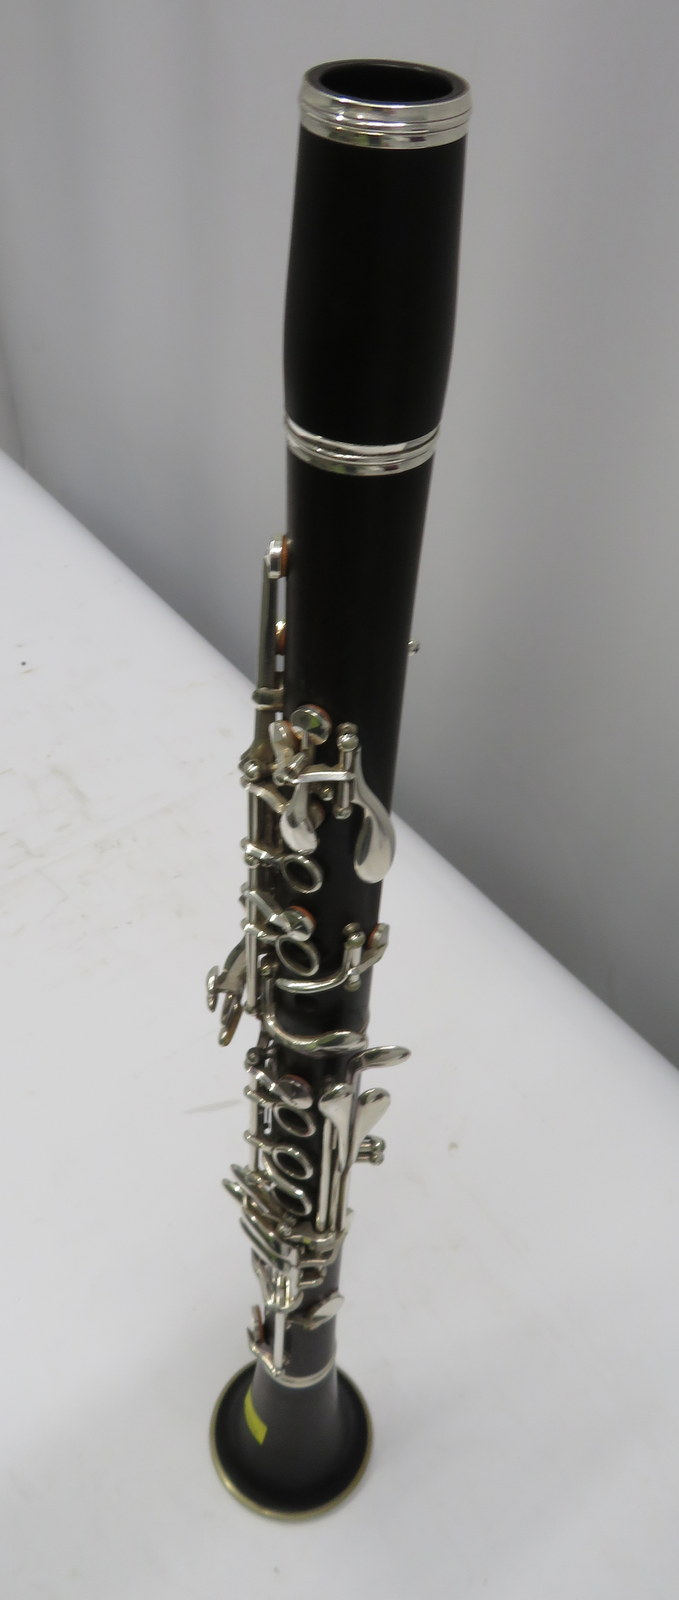 Buffet Crampon R13 clarinet with case. Serial number: 466627. - Image 3 of 15